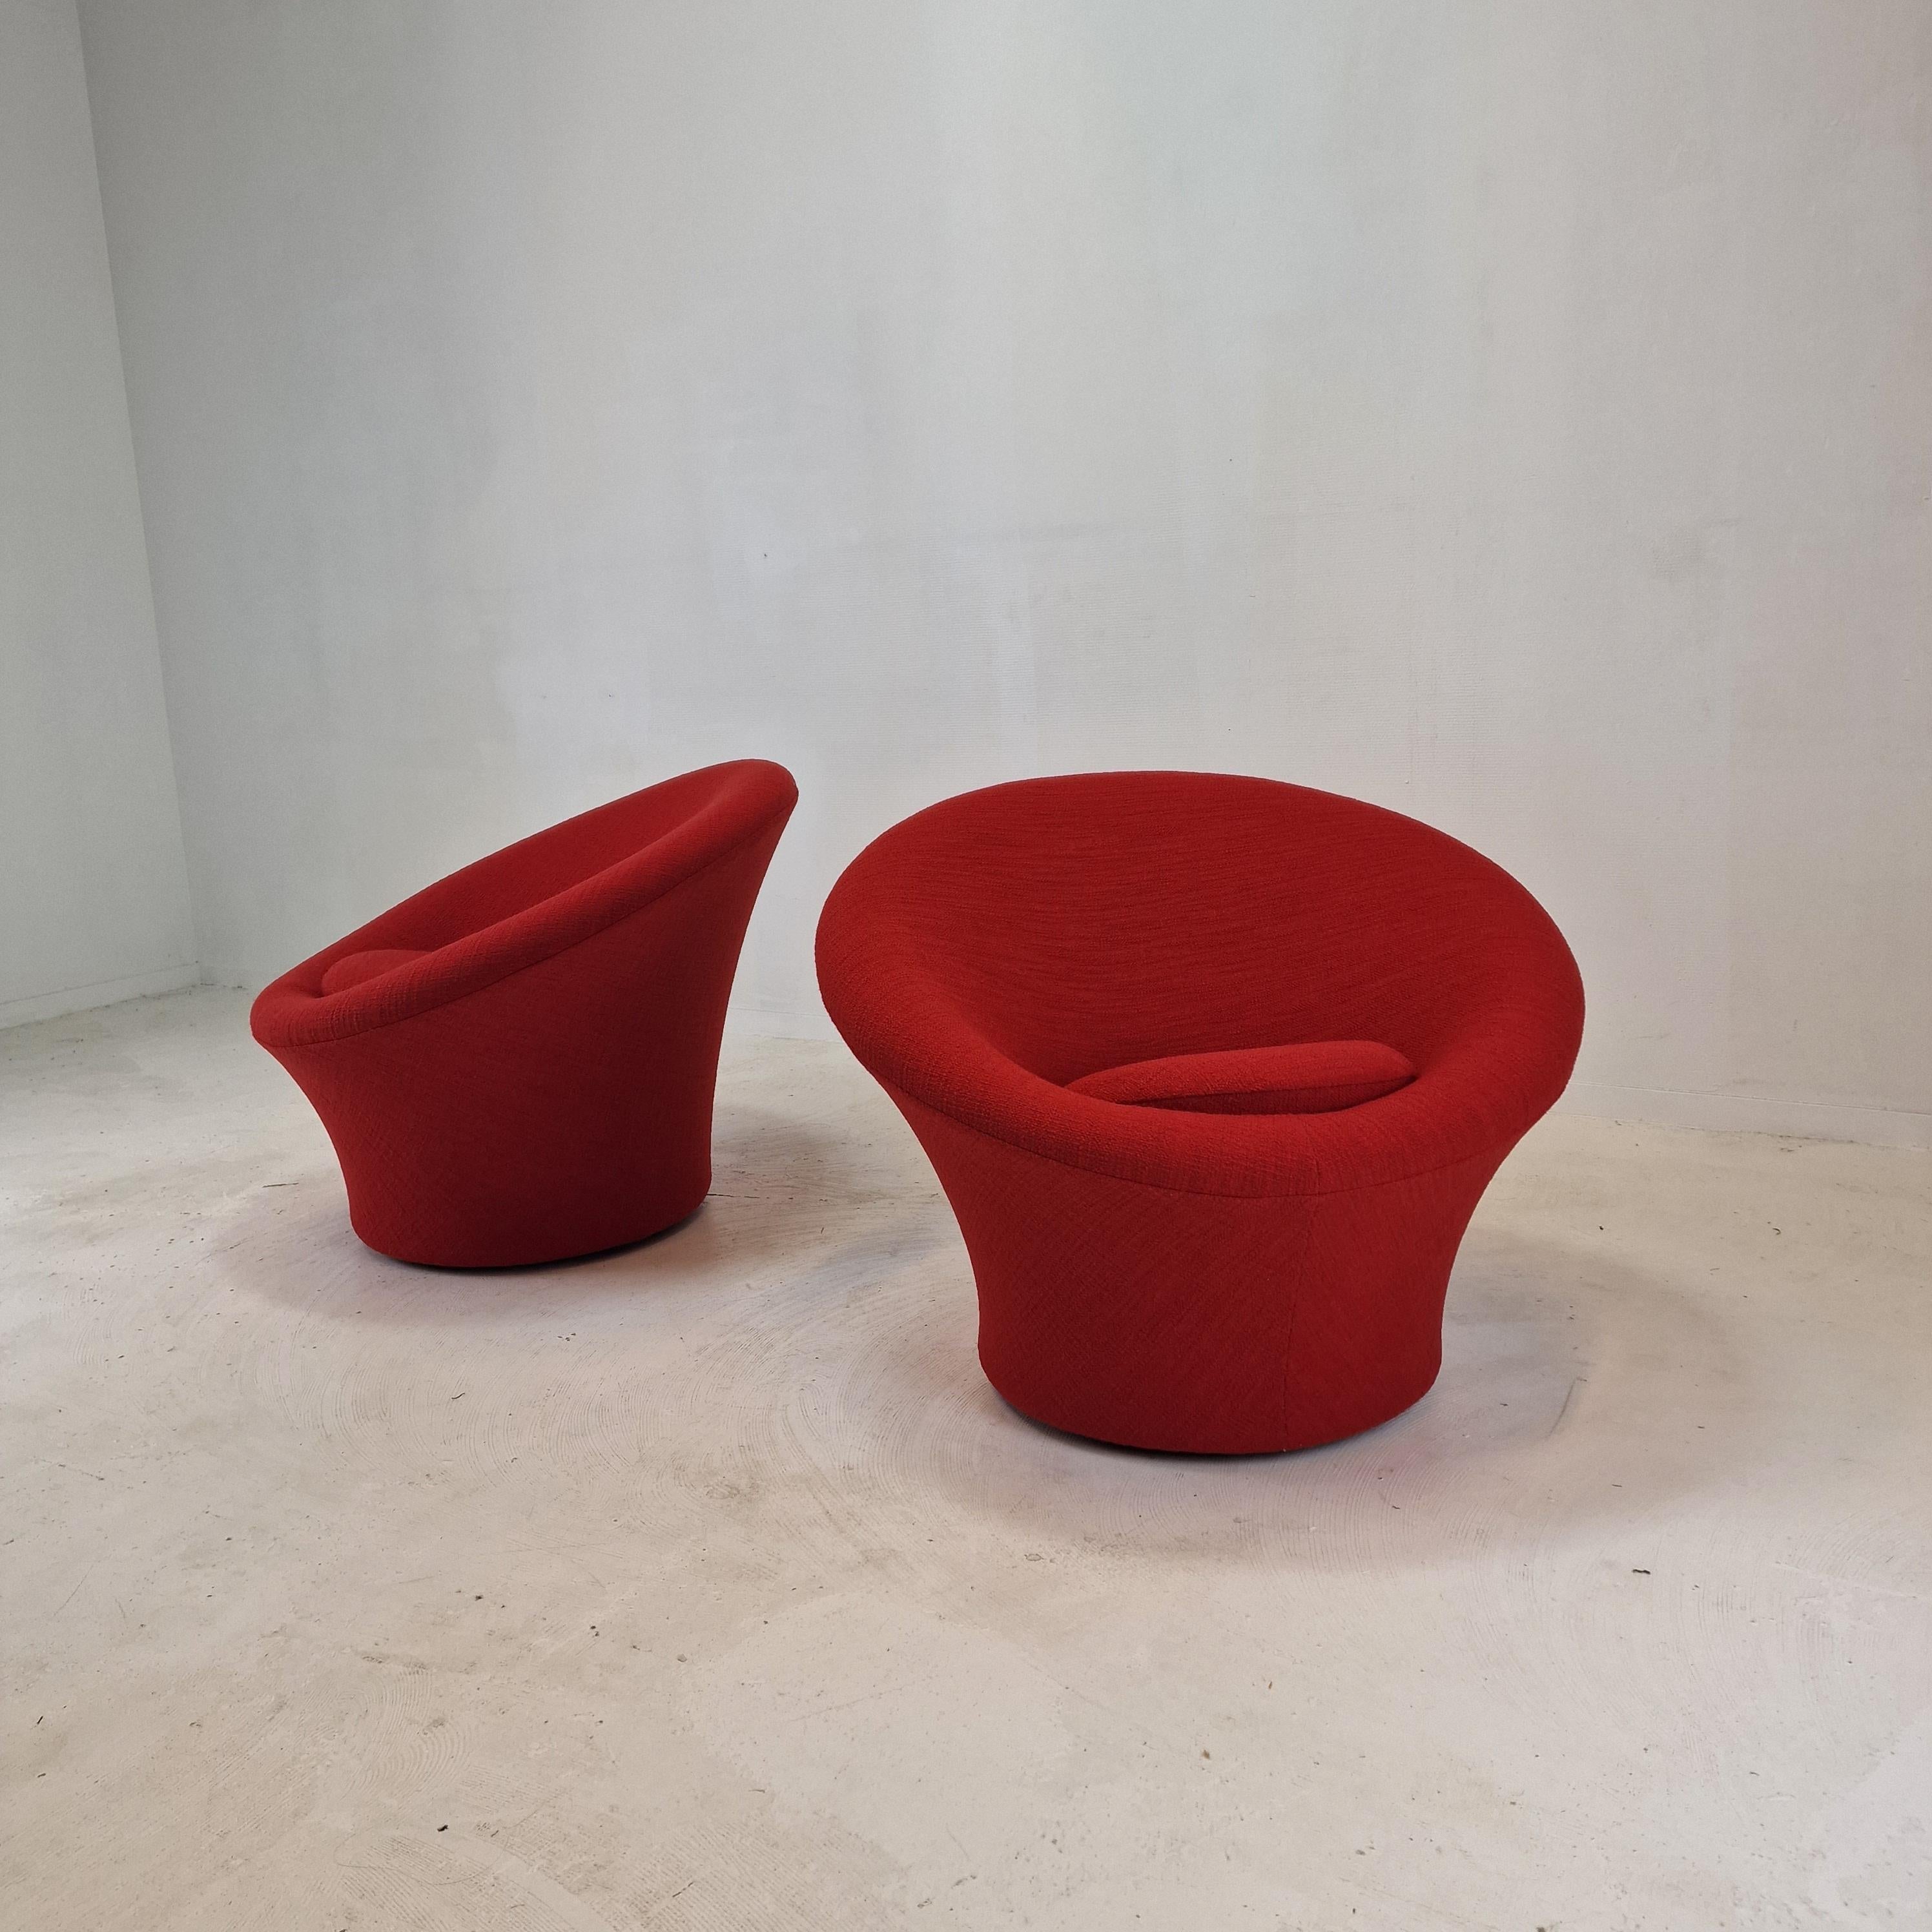 Very comfortable and cosy Artifort Mushroom chair, designed by Pierre Paulin in the 60s. 
These particular chairs are fabricated in the 80s

Covered with very exclusive Dedar Italy fabric.
This wool fabric has a beautiful red color.

The